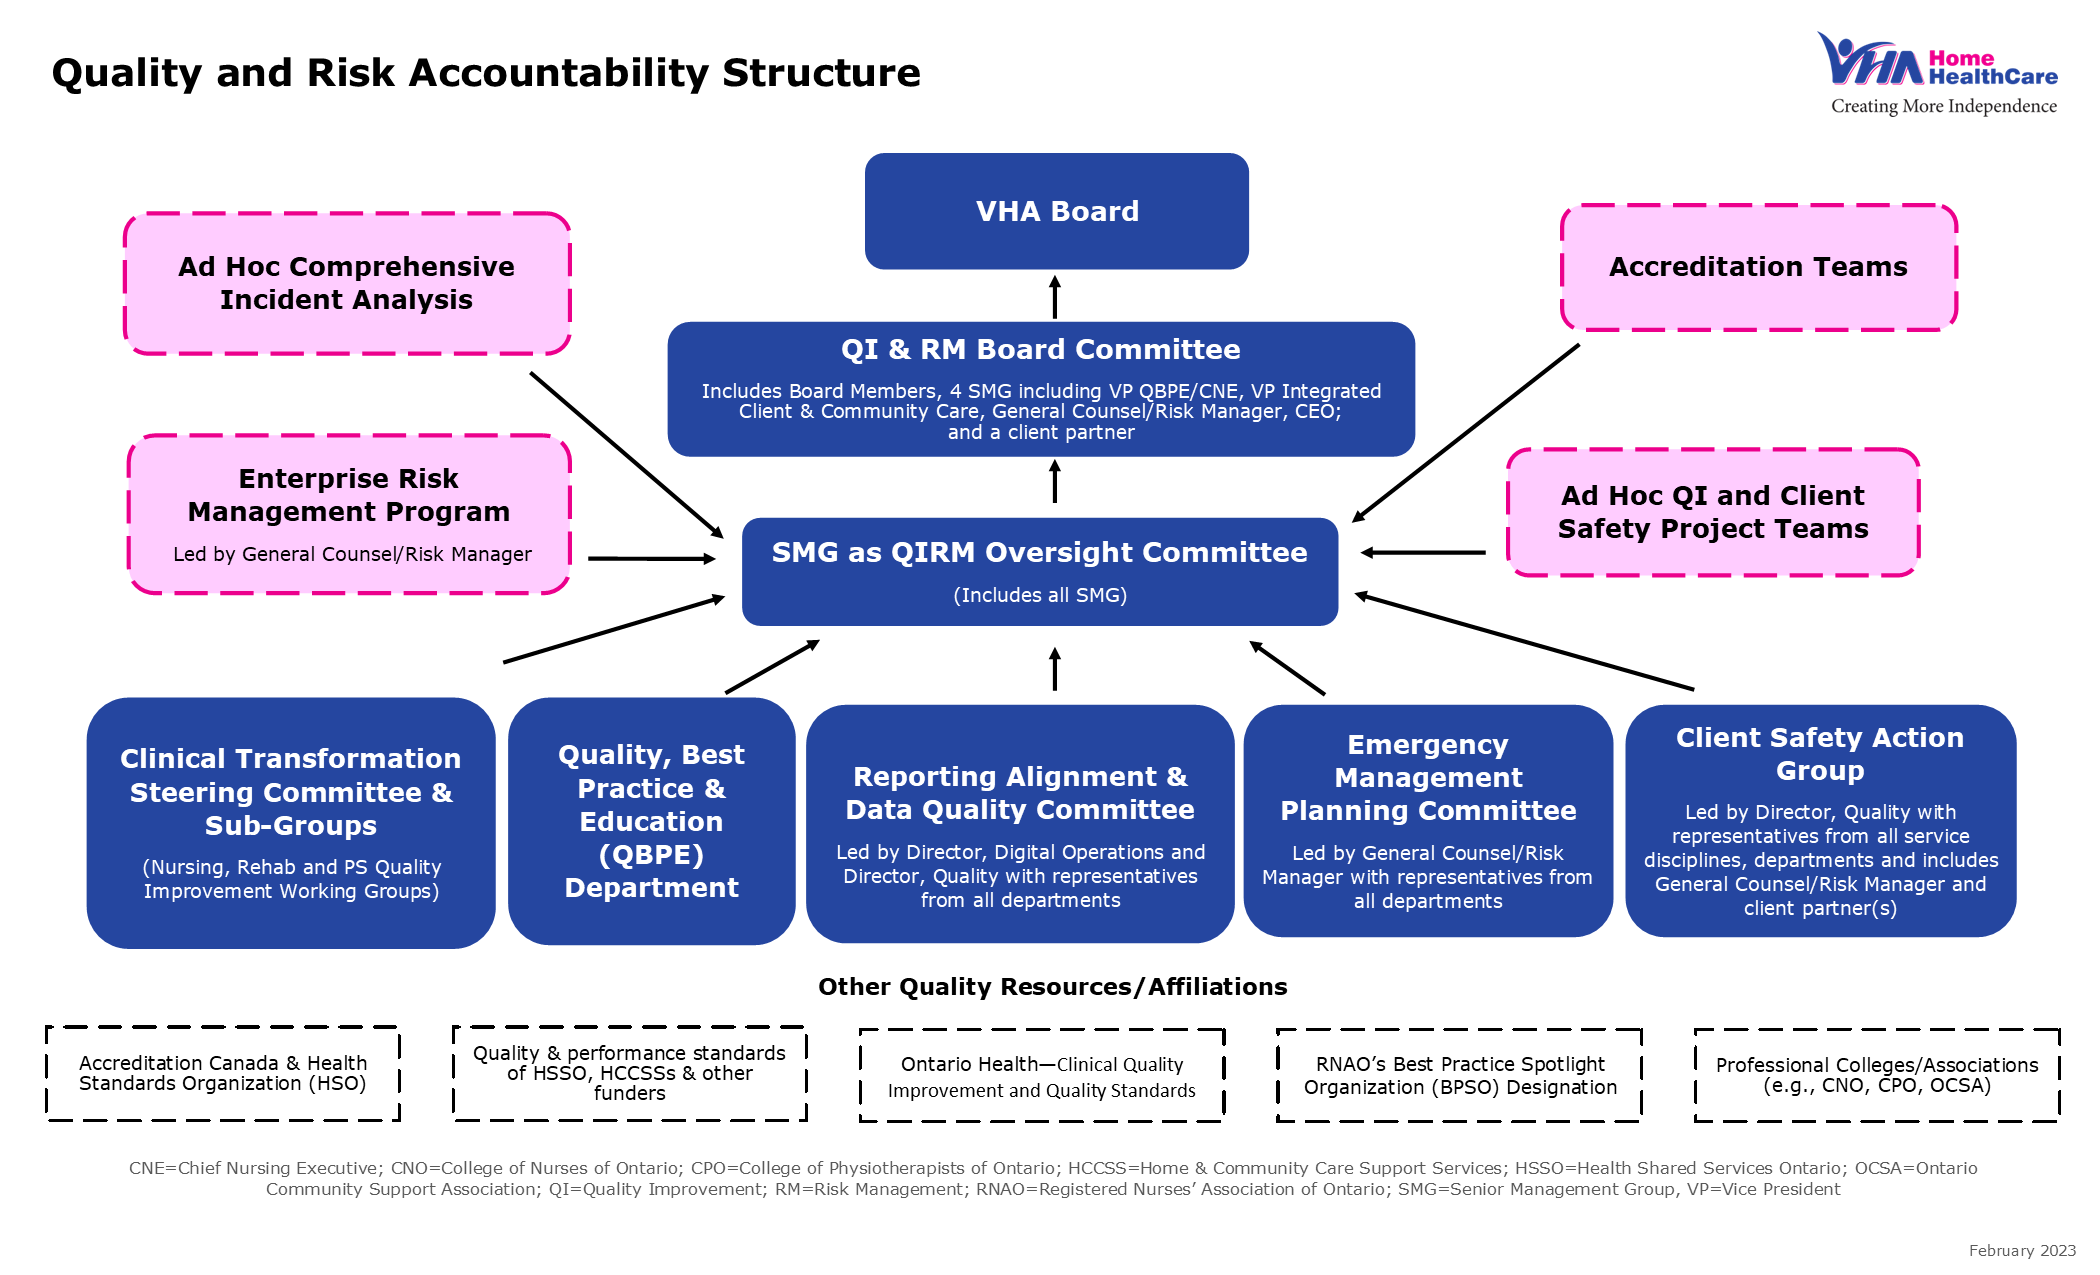 Diagram of VHA's Quality and Risk Accountability Structure